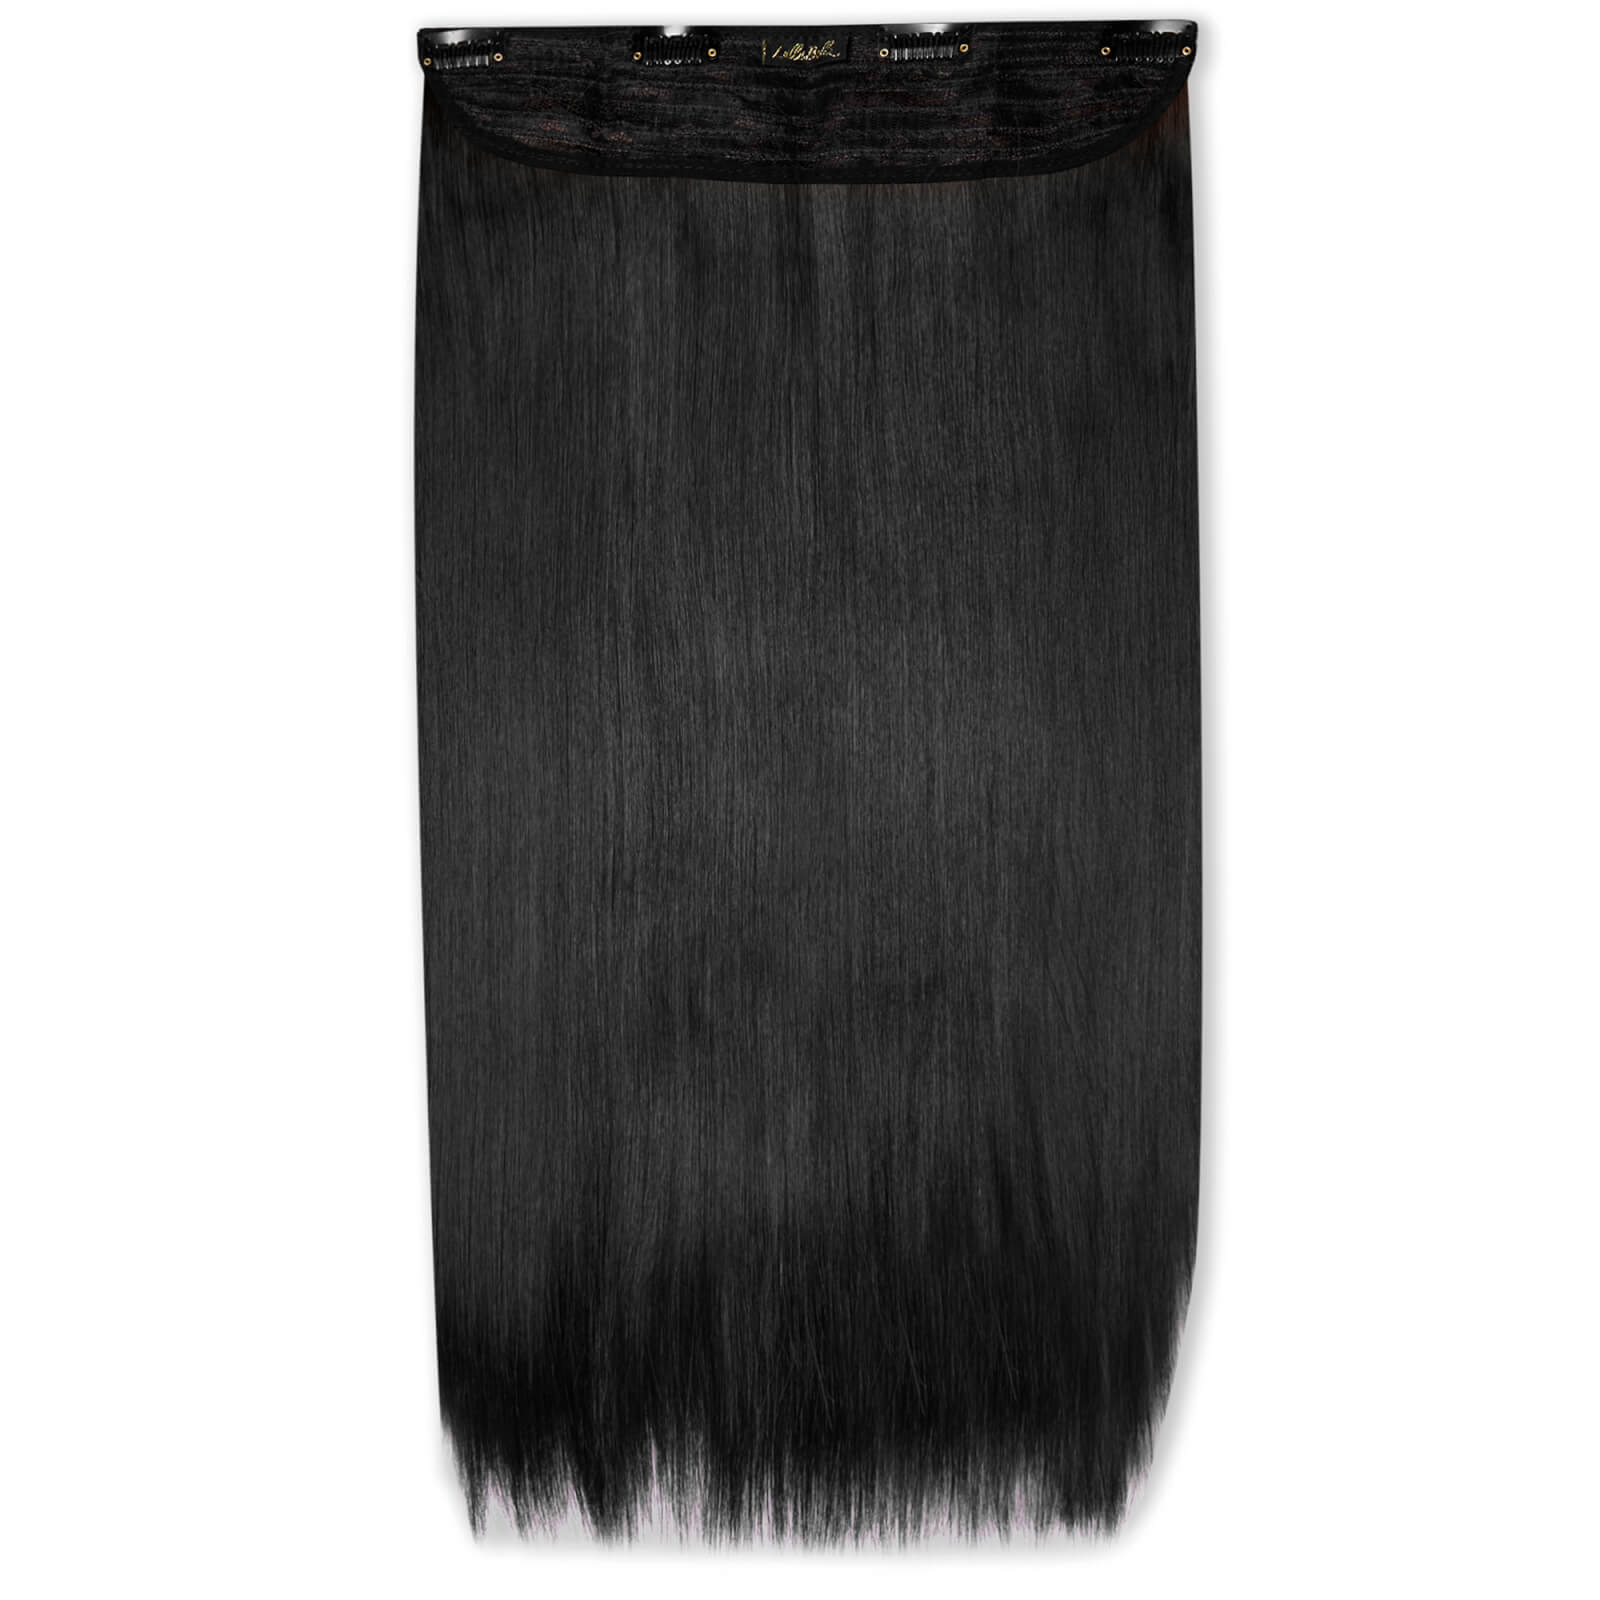 LullaBellz Thick 24 1-Piece Straight Clip in Hair Extensions (Various Colours) - Natural Black von Lullabellz